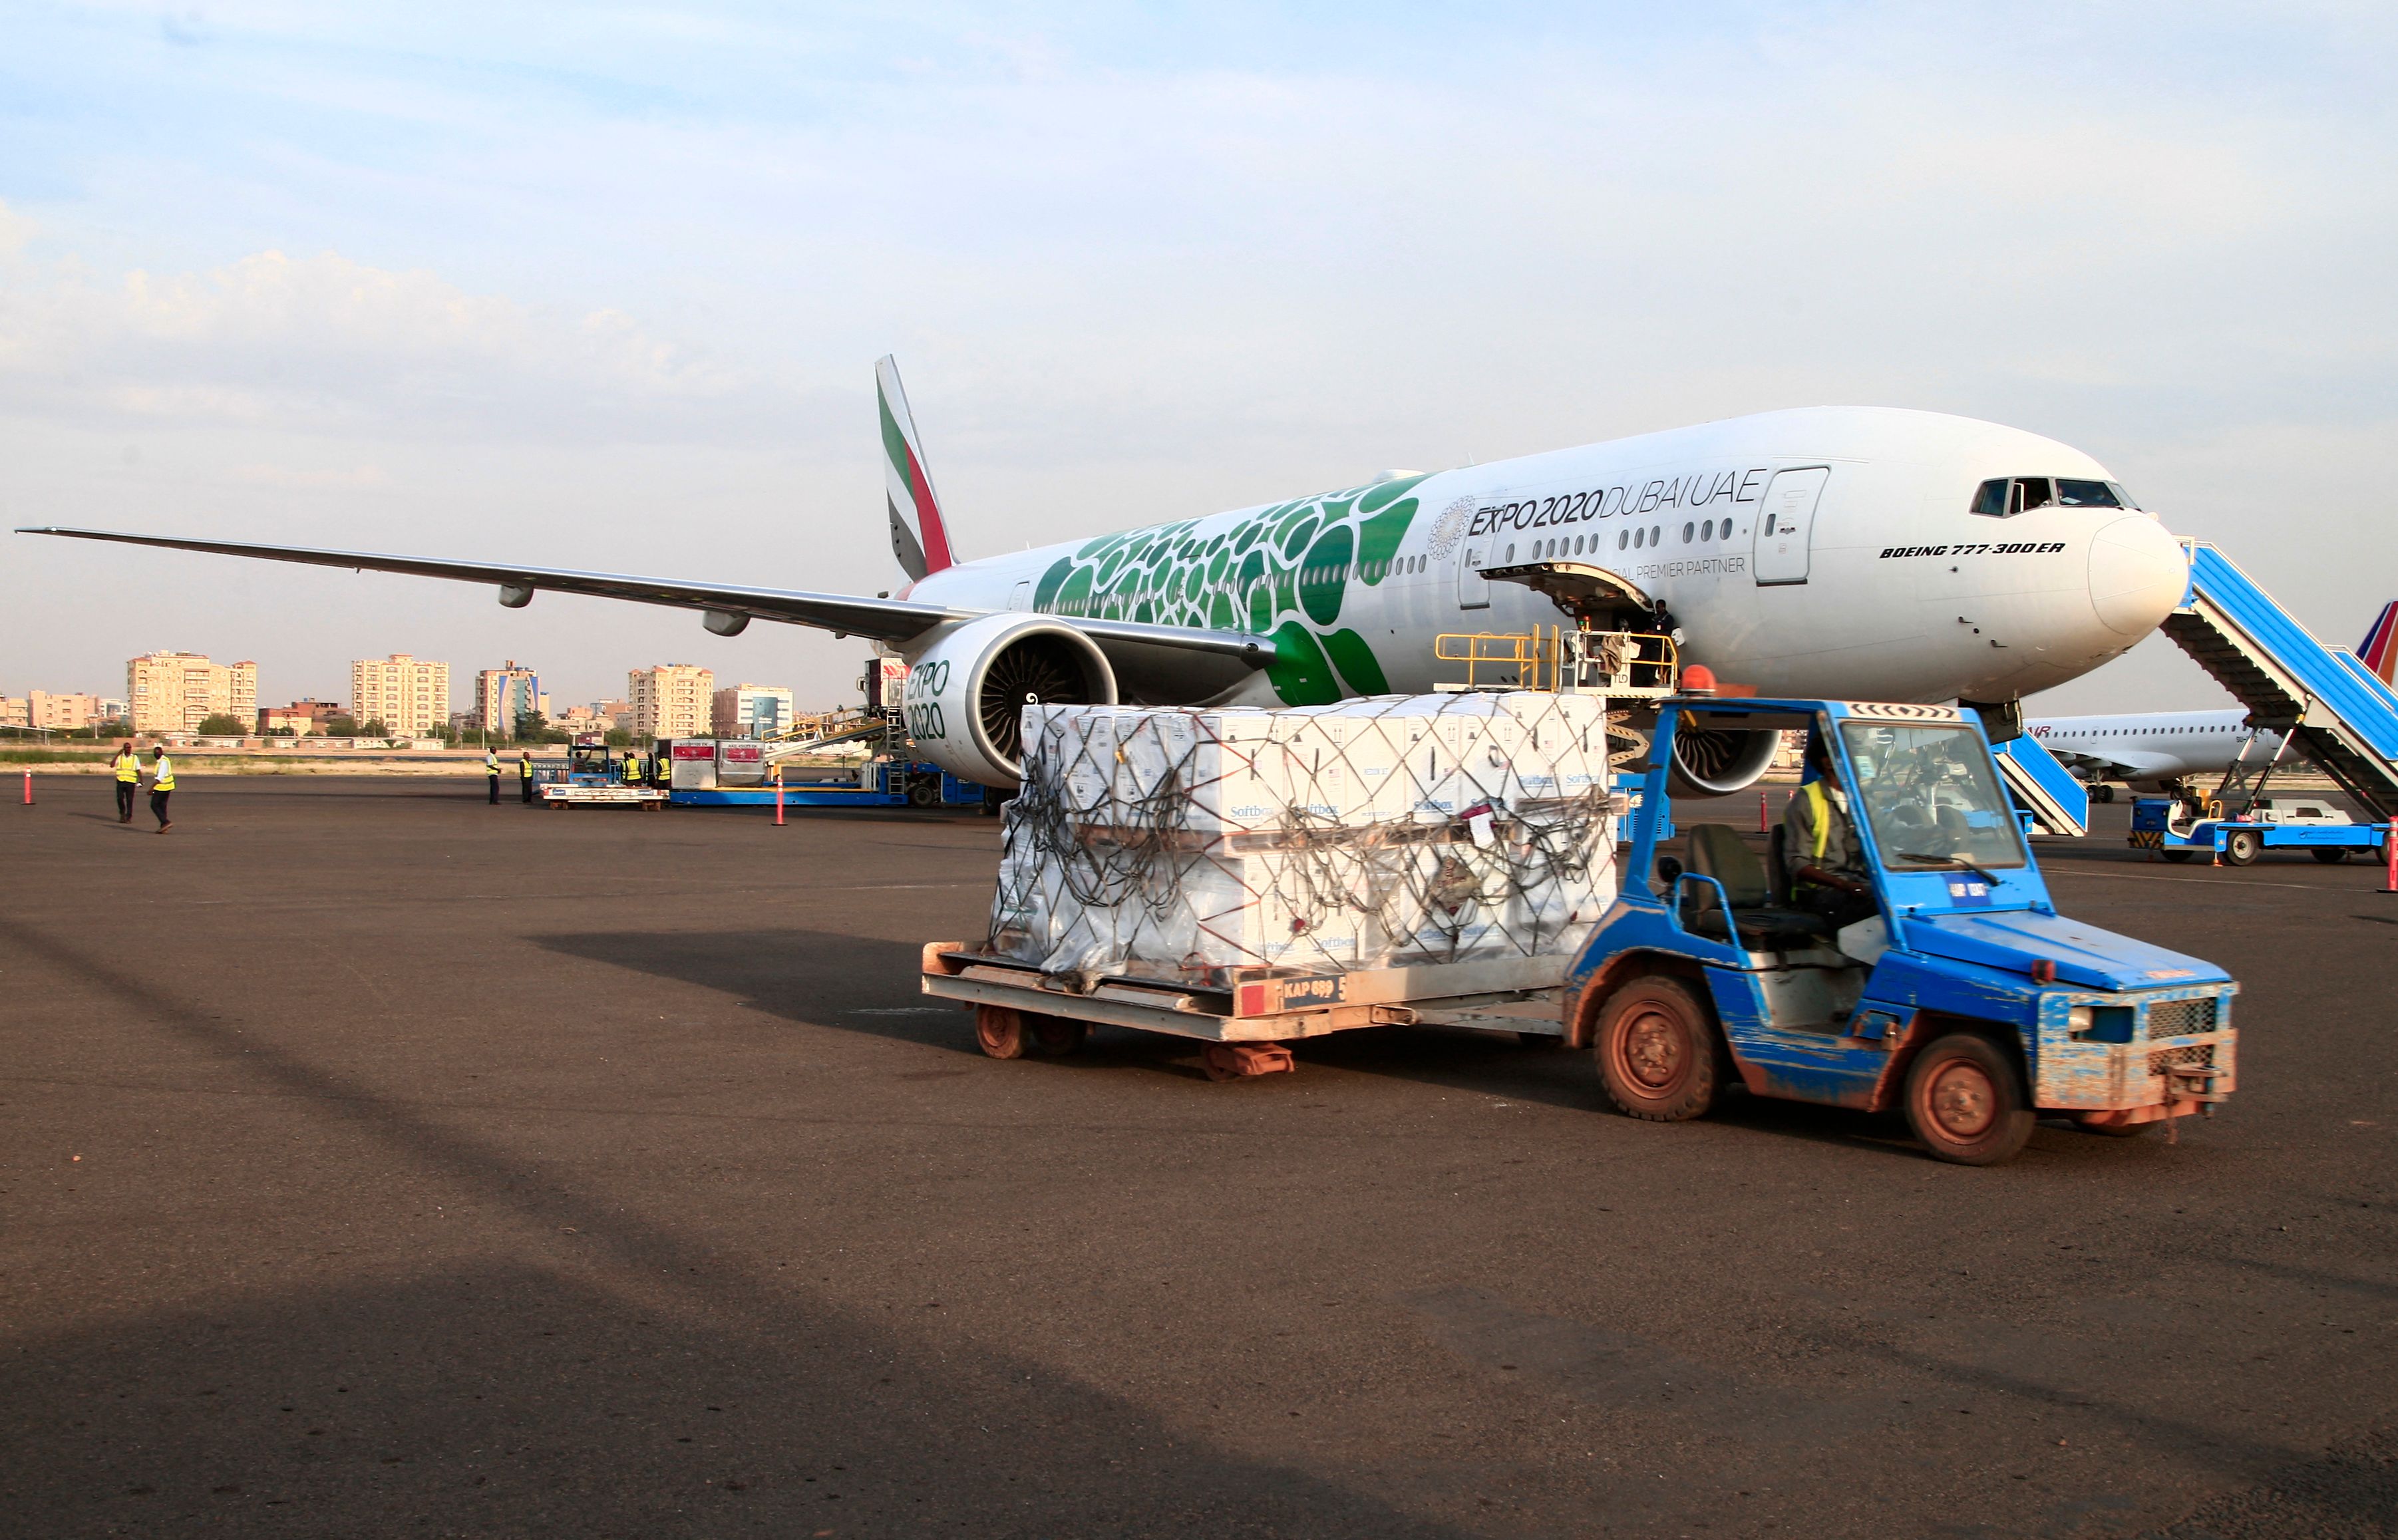 A shipment of vaccines against the coronavirus sent to Sudan by the Covax vaccine-sharing initiative, are unloaded shortly after an Emirates plane landed at the airport in the capital Khartoum, on October 6, 2021. 